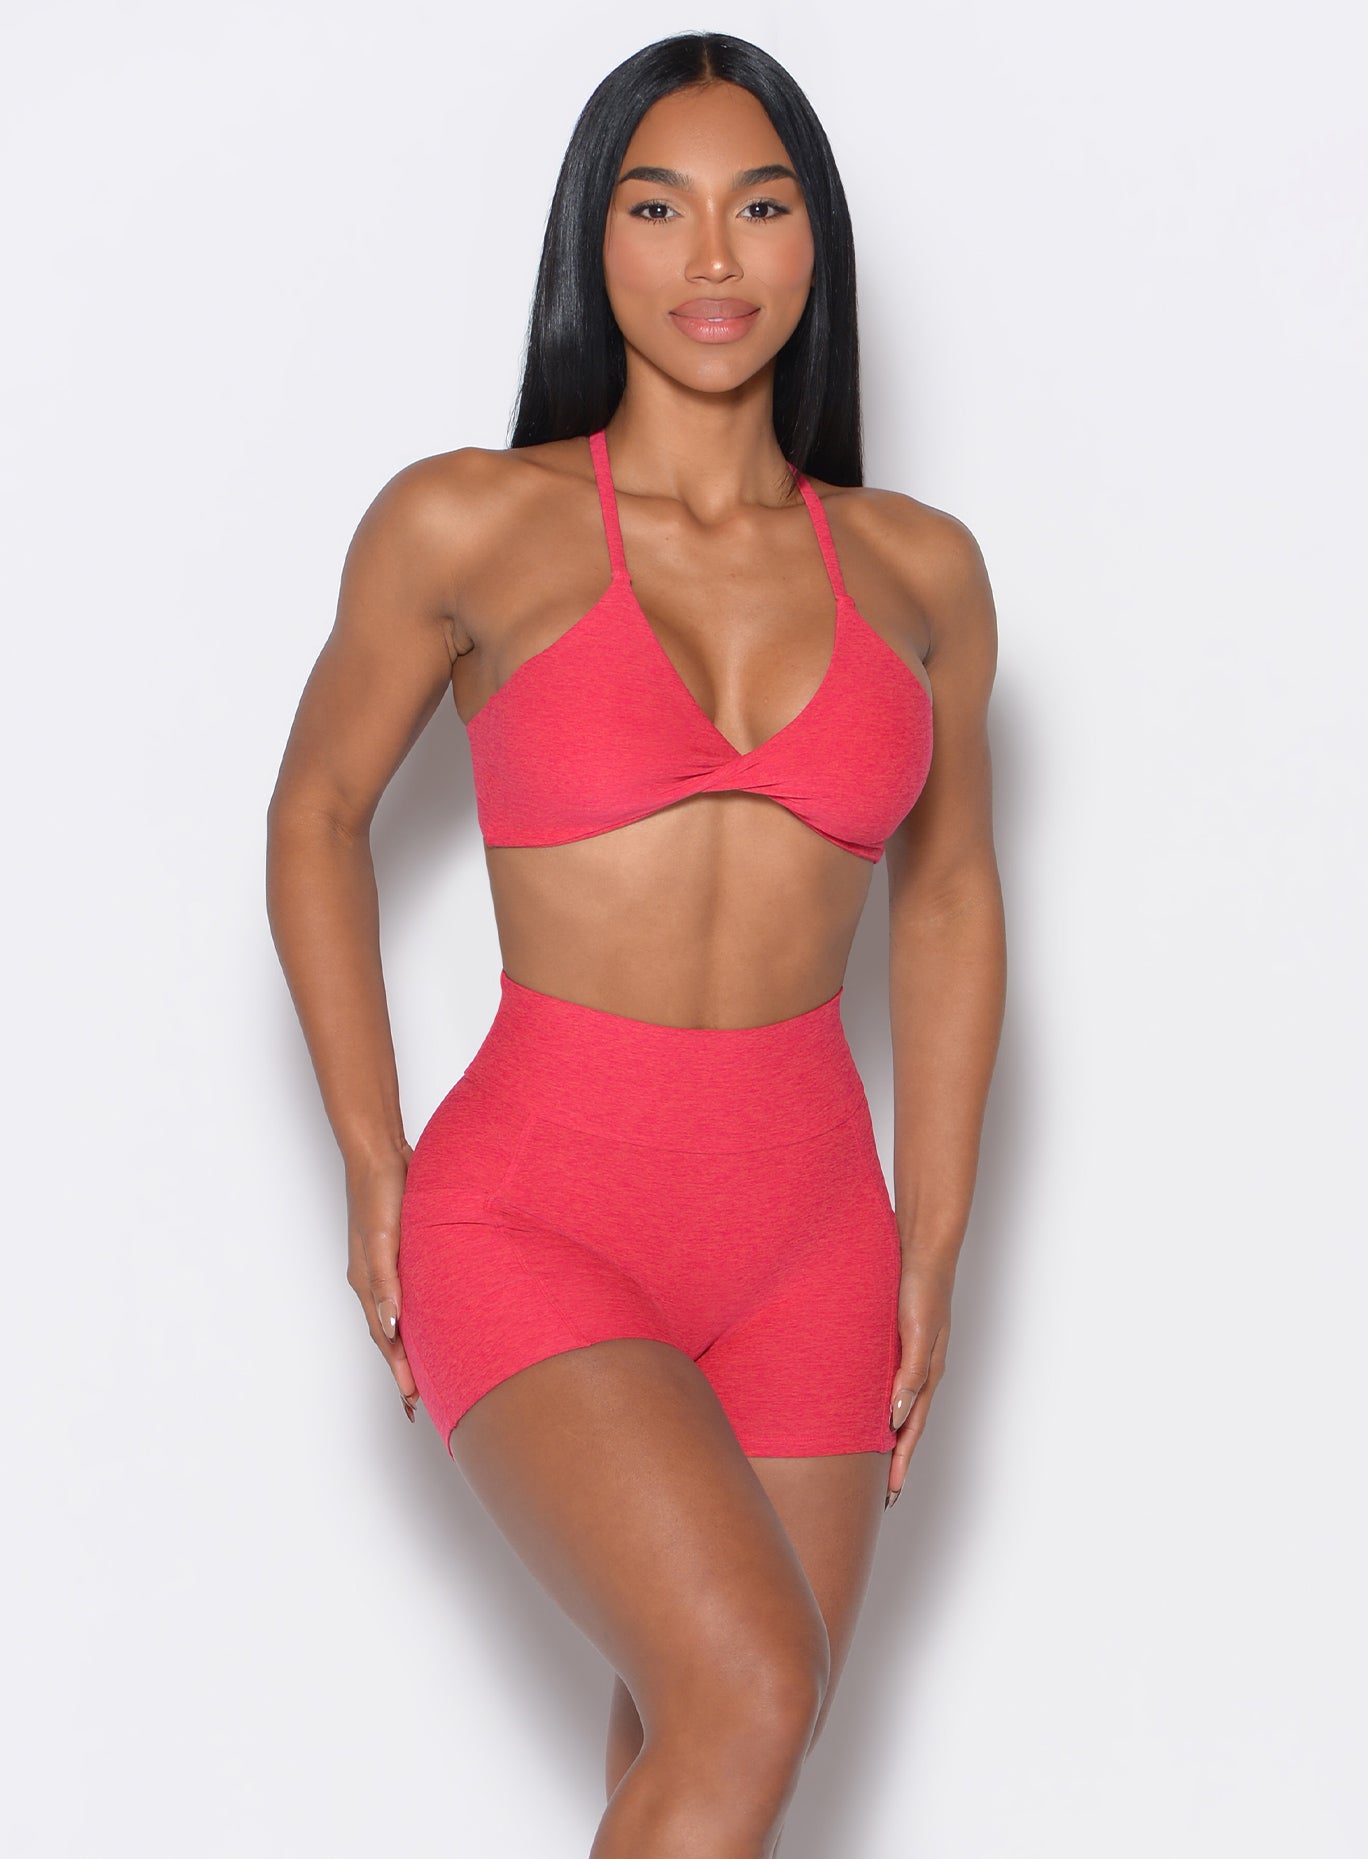 front profile view of a model facing forward wearing our twist mini bra in Raspberry Punch color along with a matching shorts